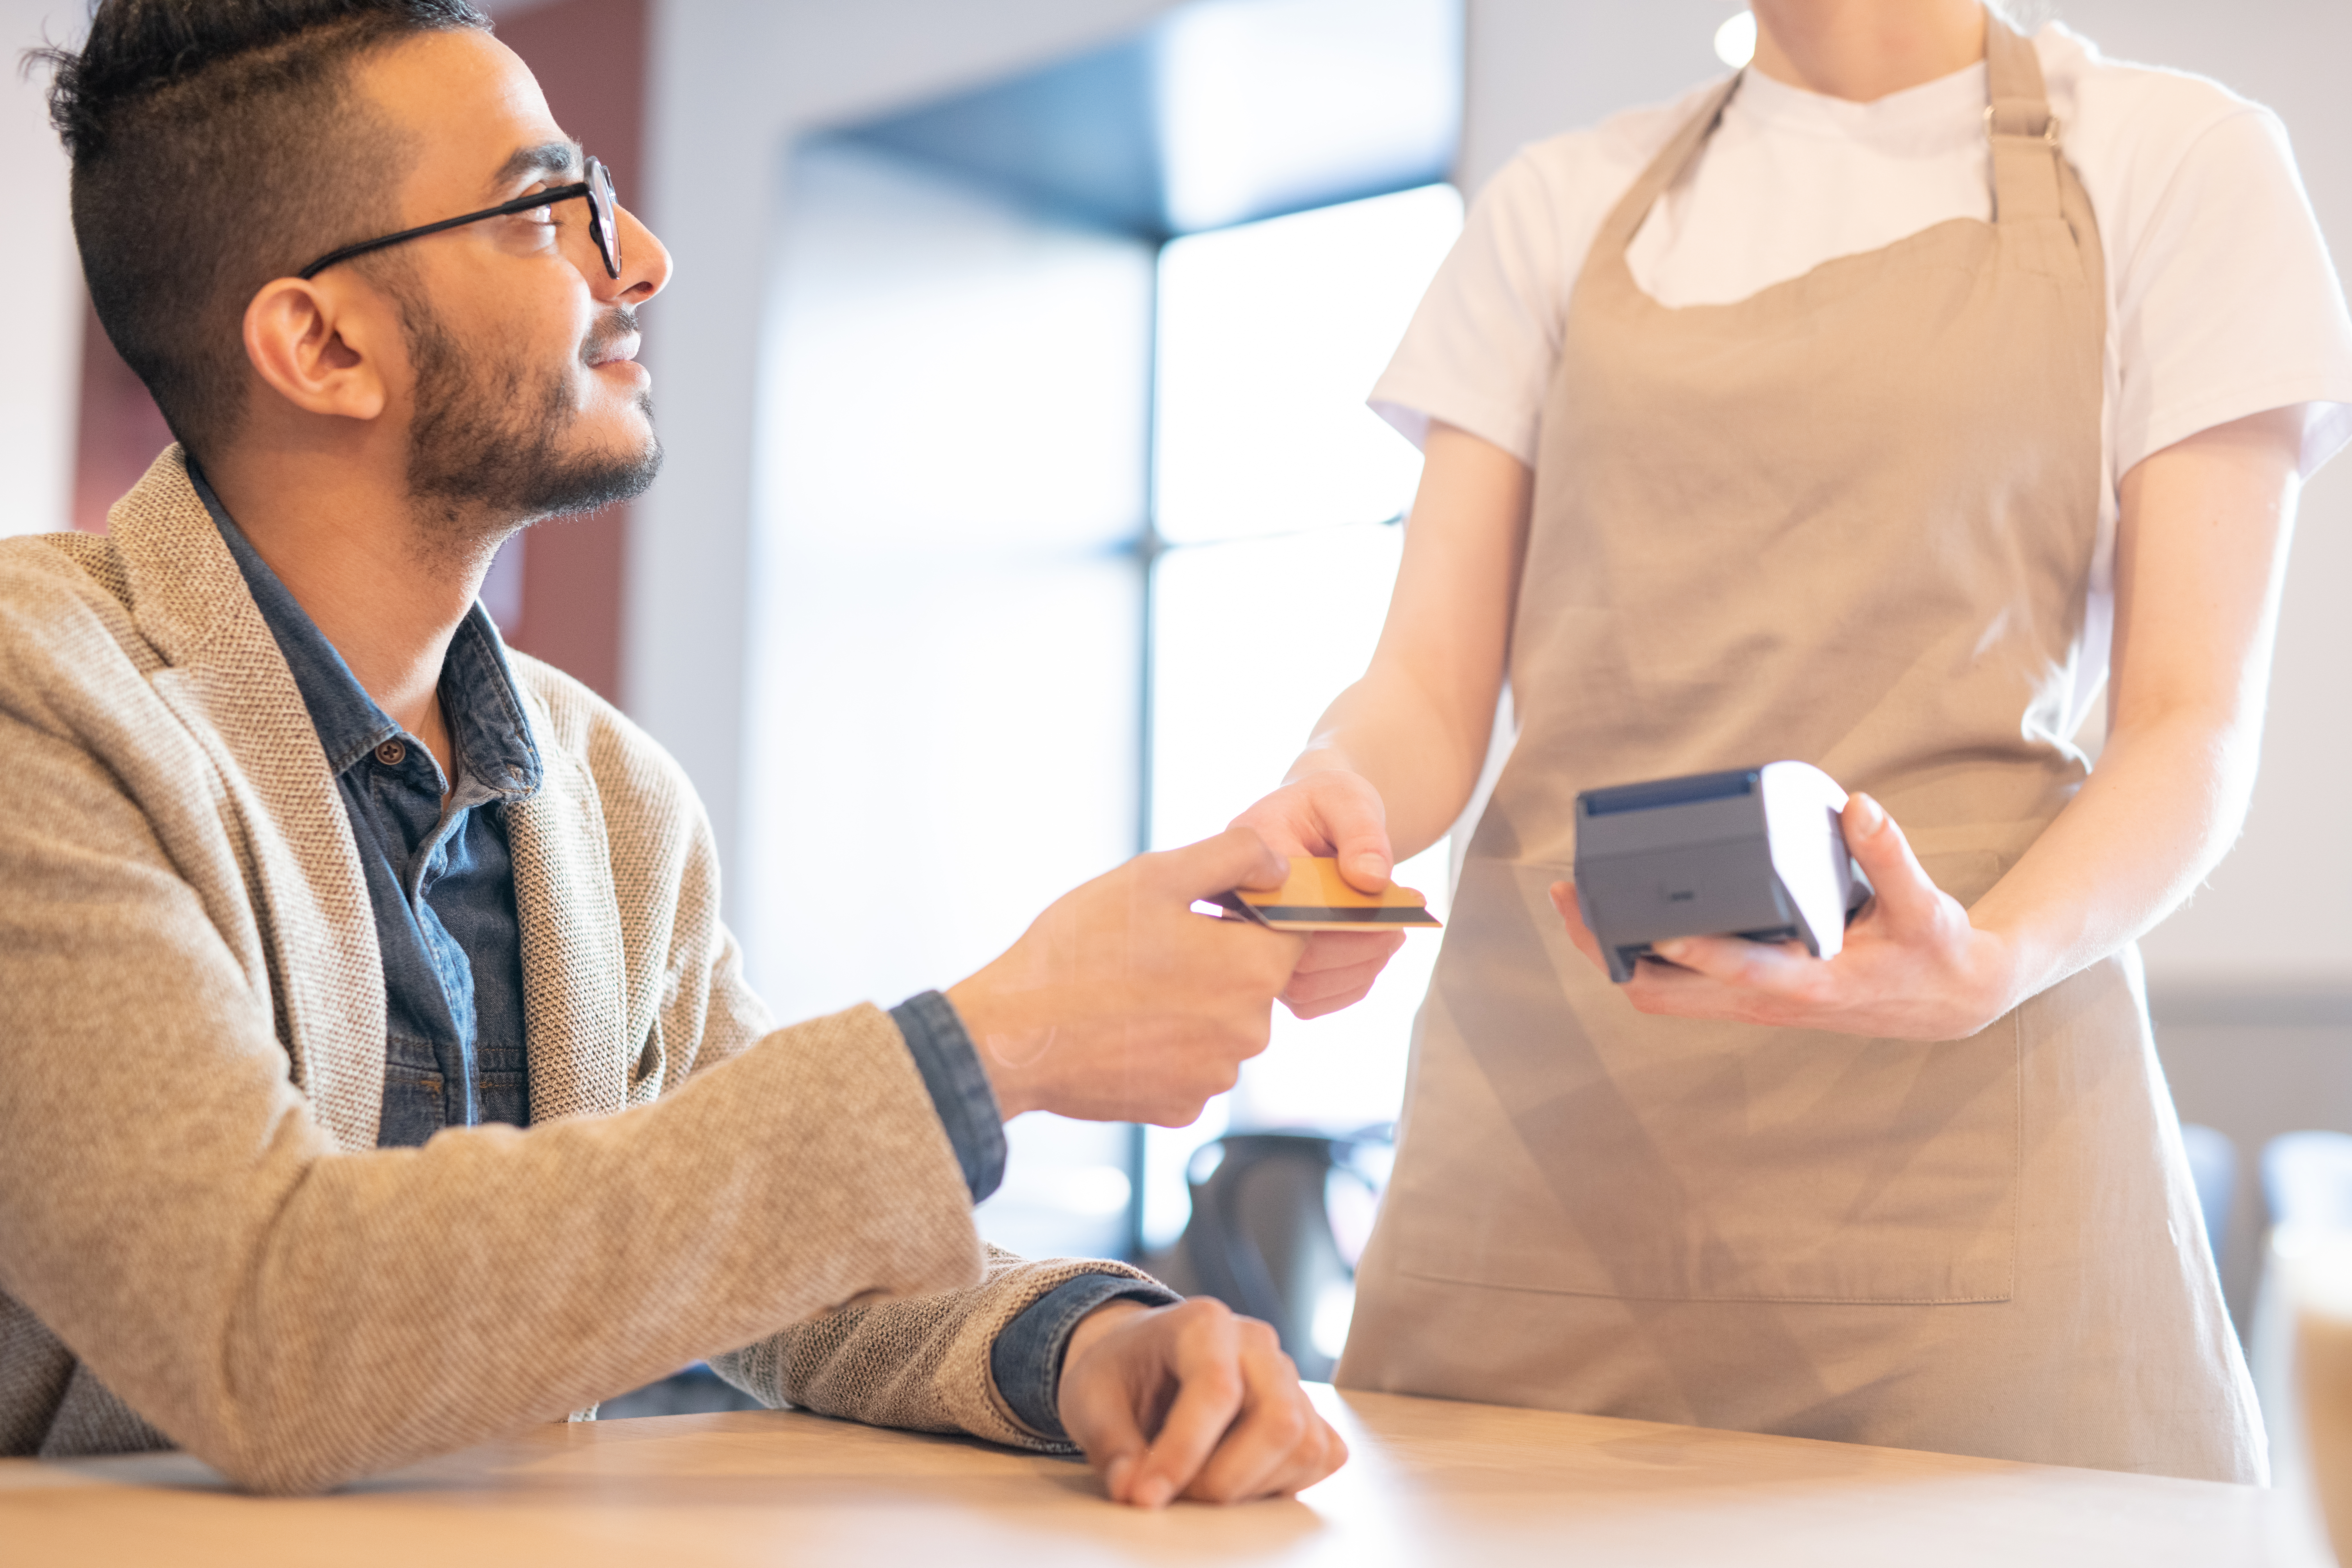 a man wearing business casual clothing hands a waitress his credit card